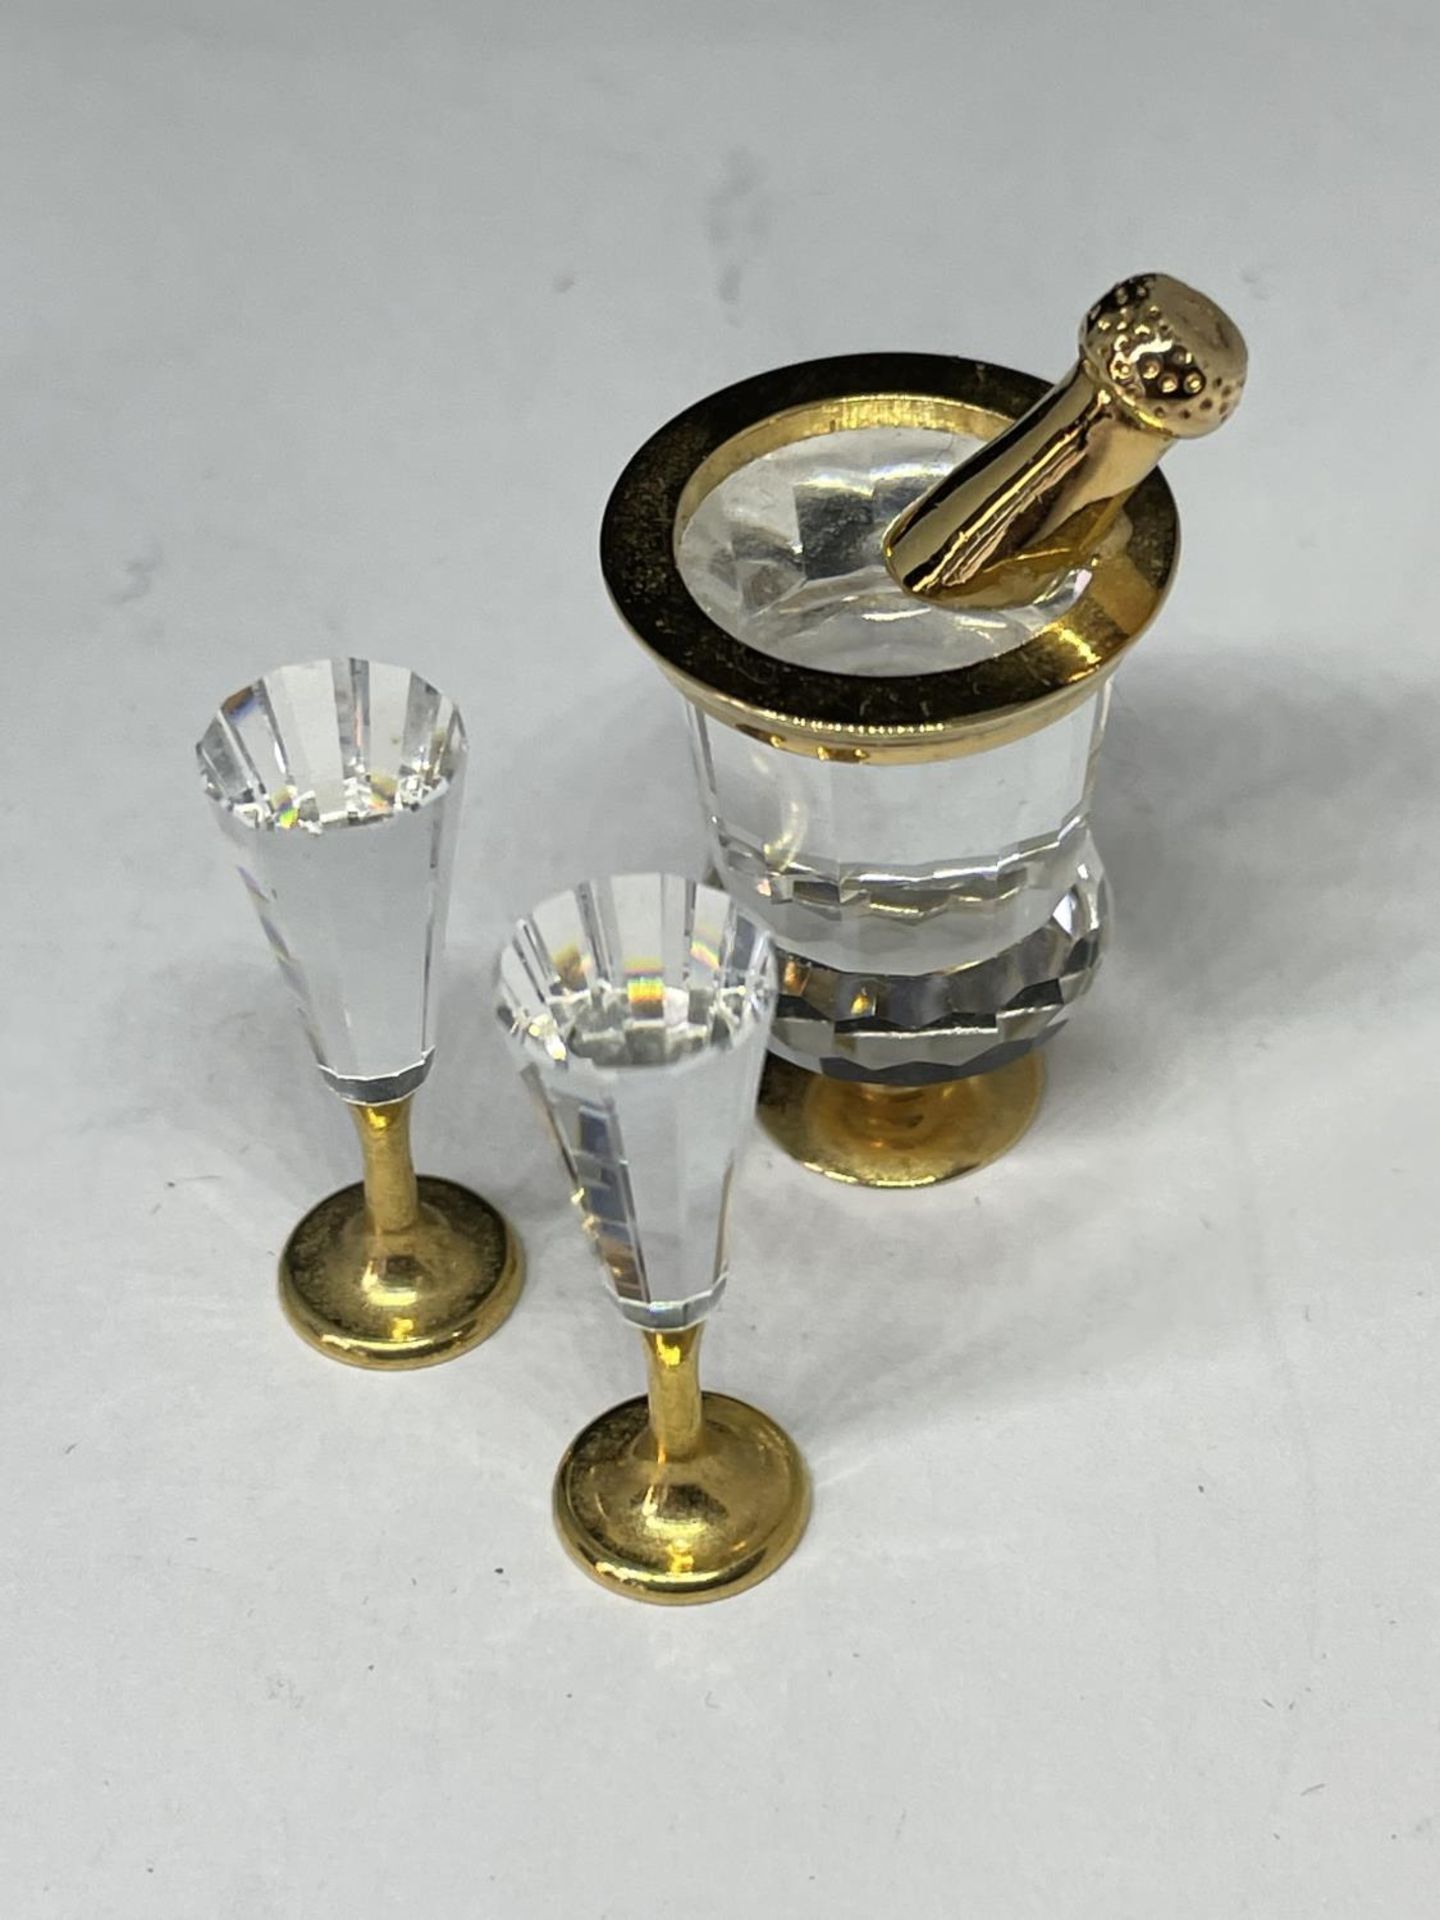 THREE SWAROVSKI CRYSTALS TO INCLUDE A SEAHORSE, SNAIL AND CHAMPAGNE BUCKET WITH BOTTLE AND FLUTES - Image 7 of 8